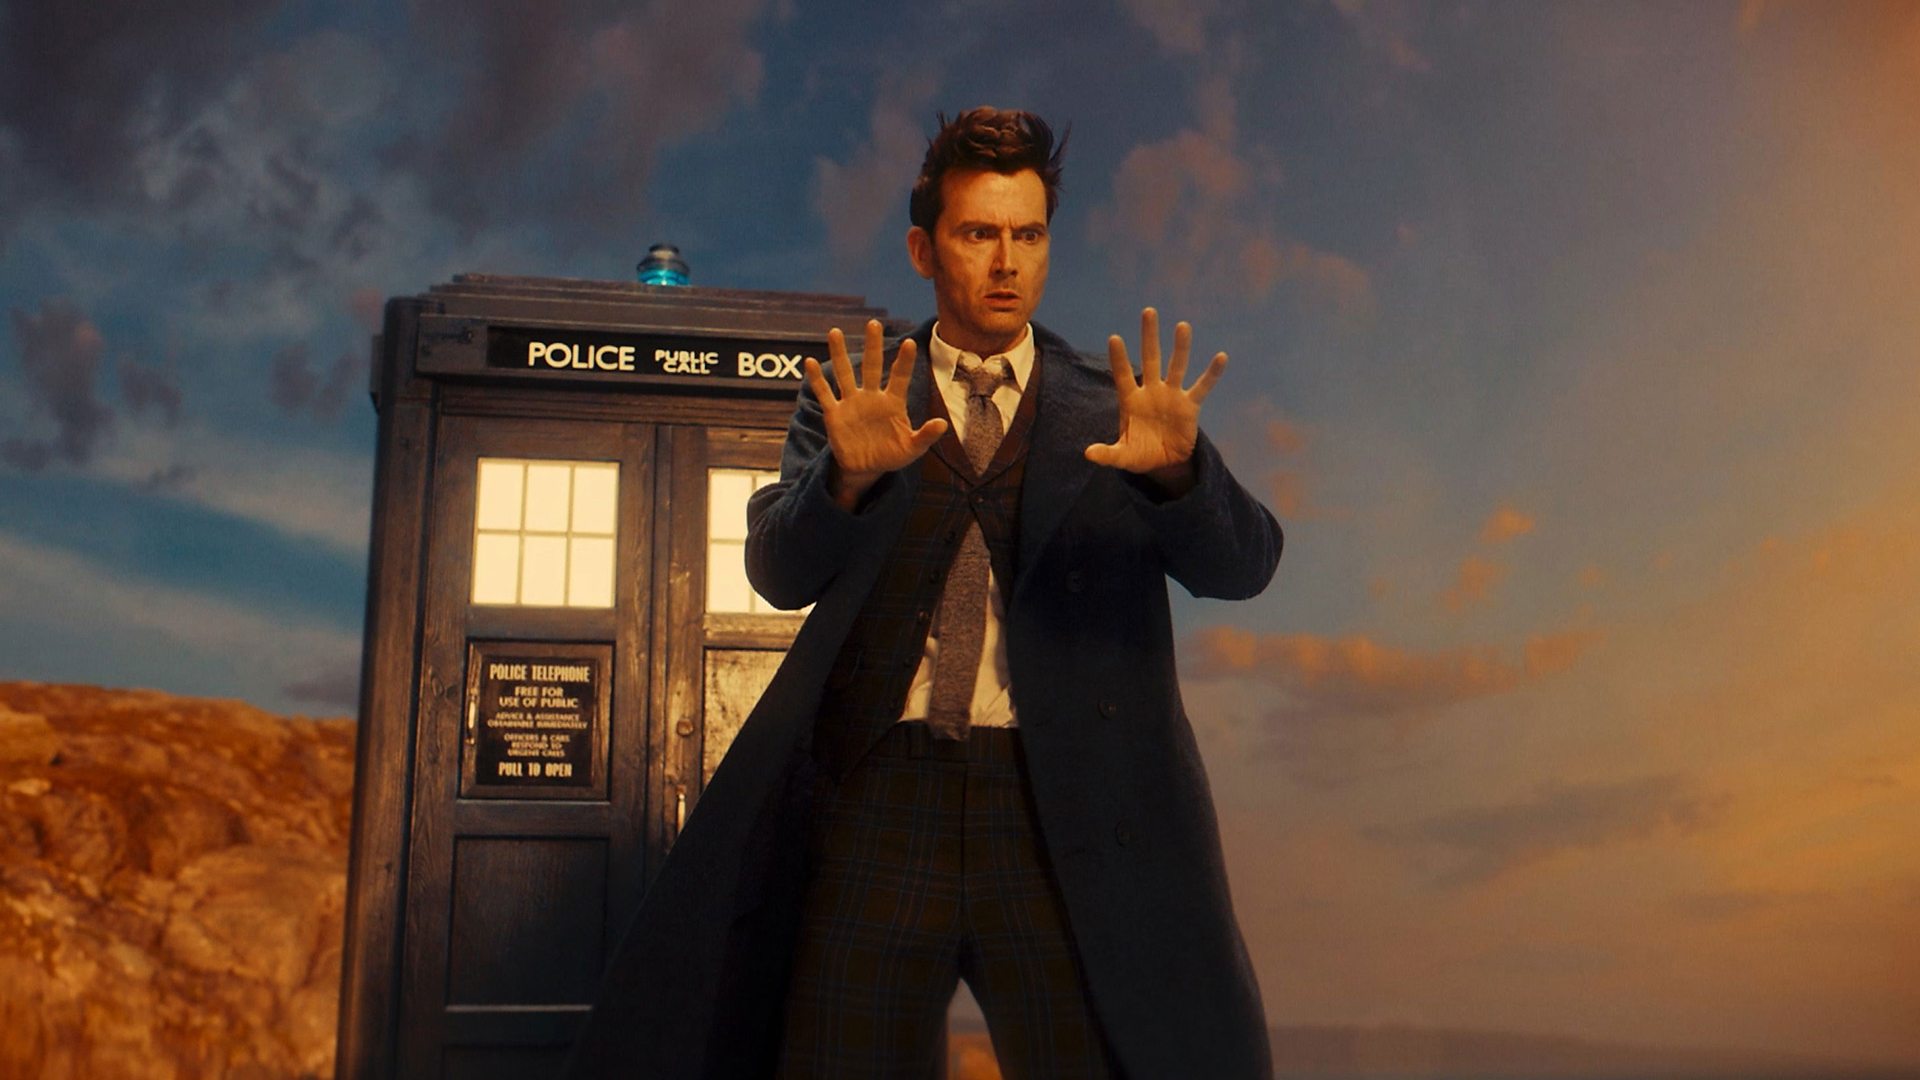 David Tennant regenerating as the Doctor in the latest season of Doctor Who